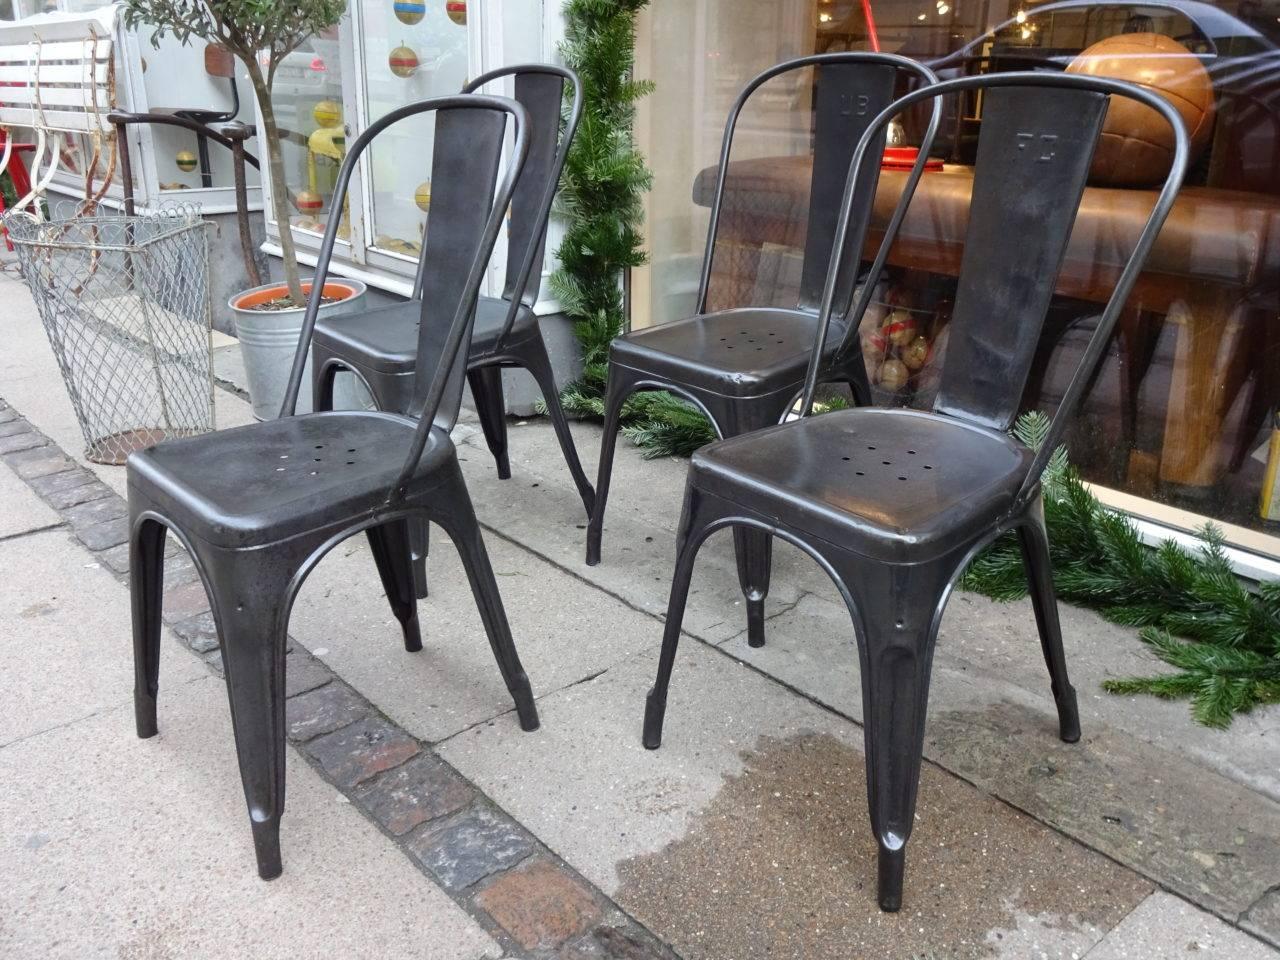 Fabulous vintage French metal Tolix chairs, designed by Xavier Pouchard. Produced since 1934, they are also displayed at New York’s MoMA and the Centre Pompidou in Paris. Appears in treated and polished iron. Super patina.